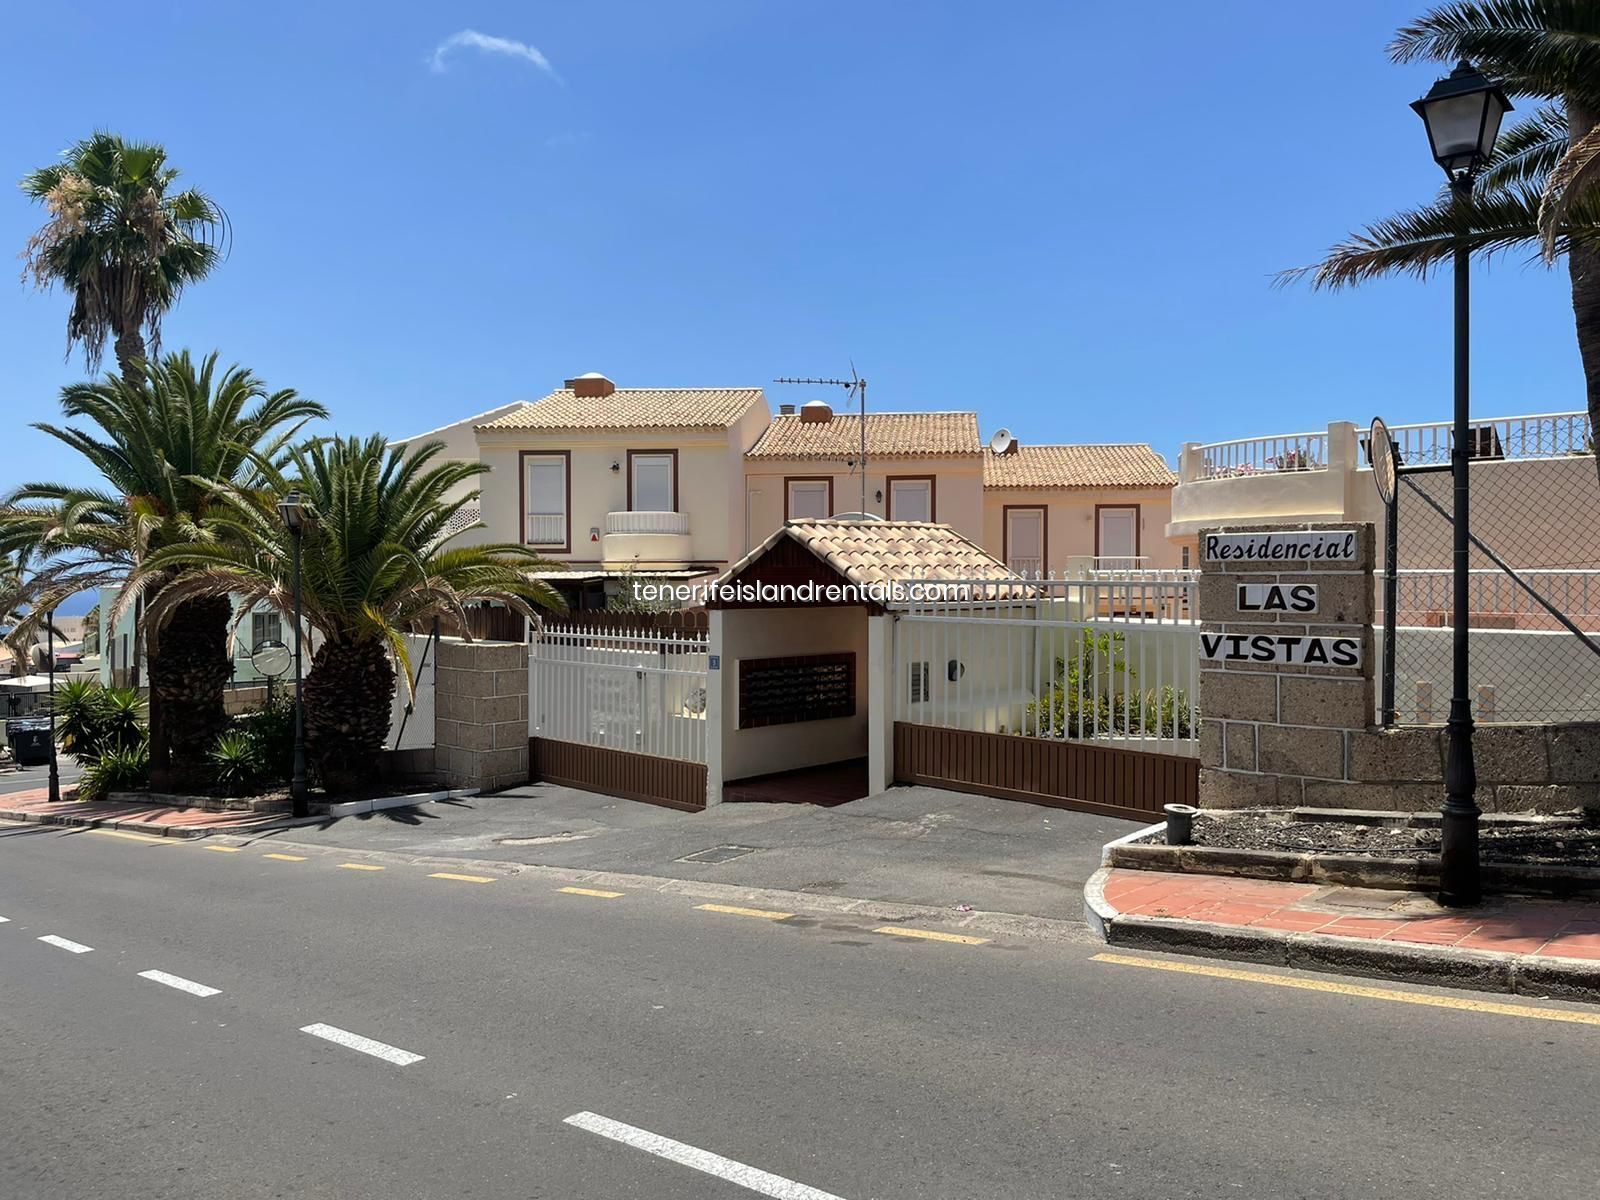 Townhouse in Chayofa marketed by Tenerife Island Rentals